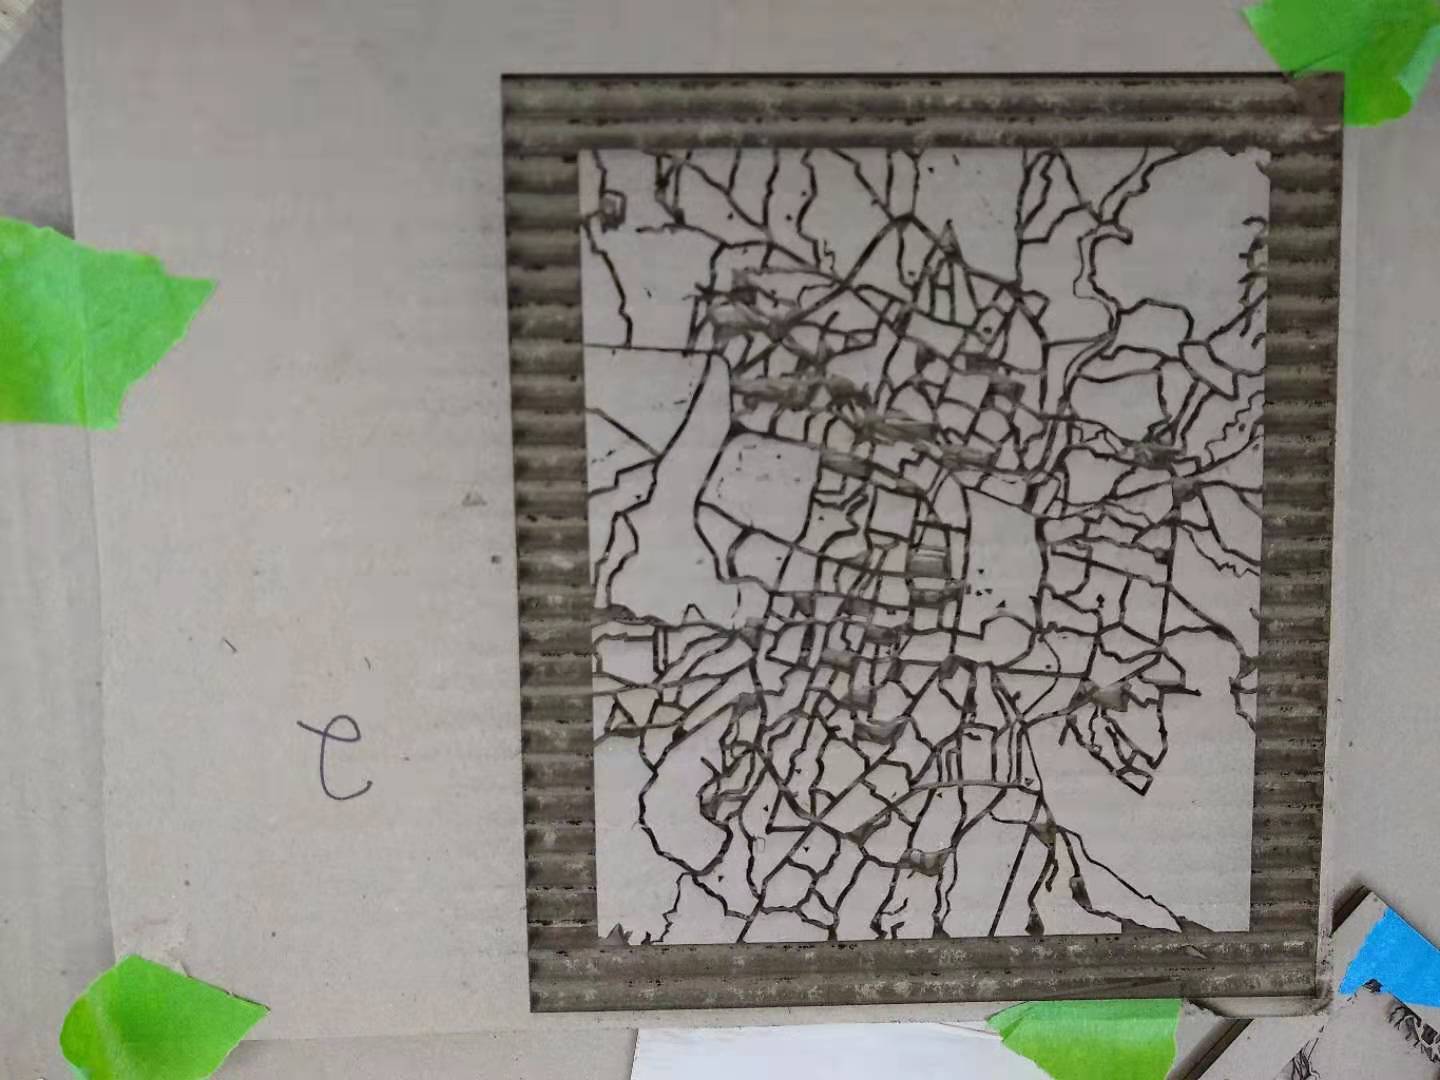 A piece of cardboard etched with a city map.